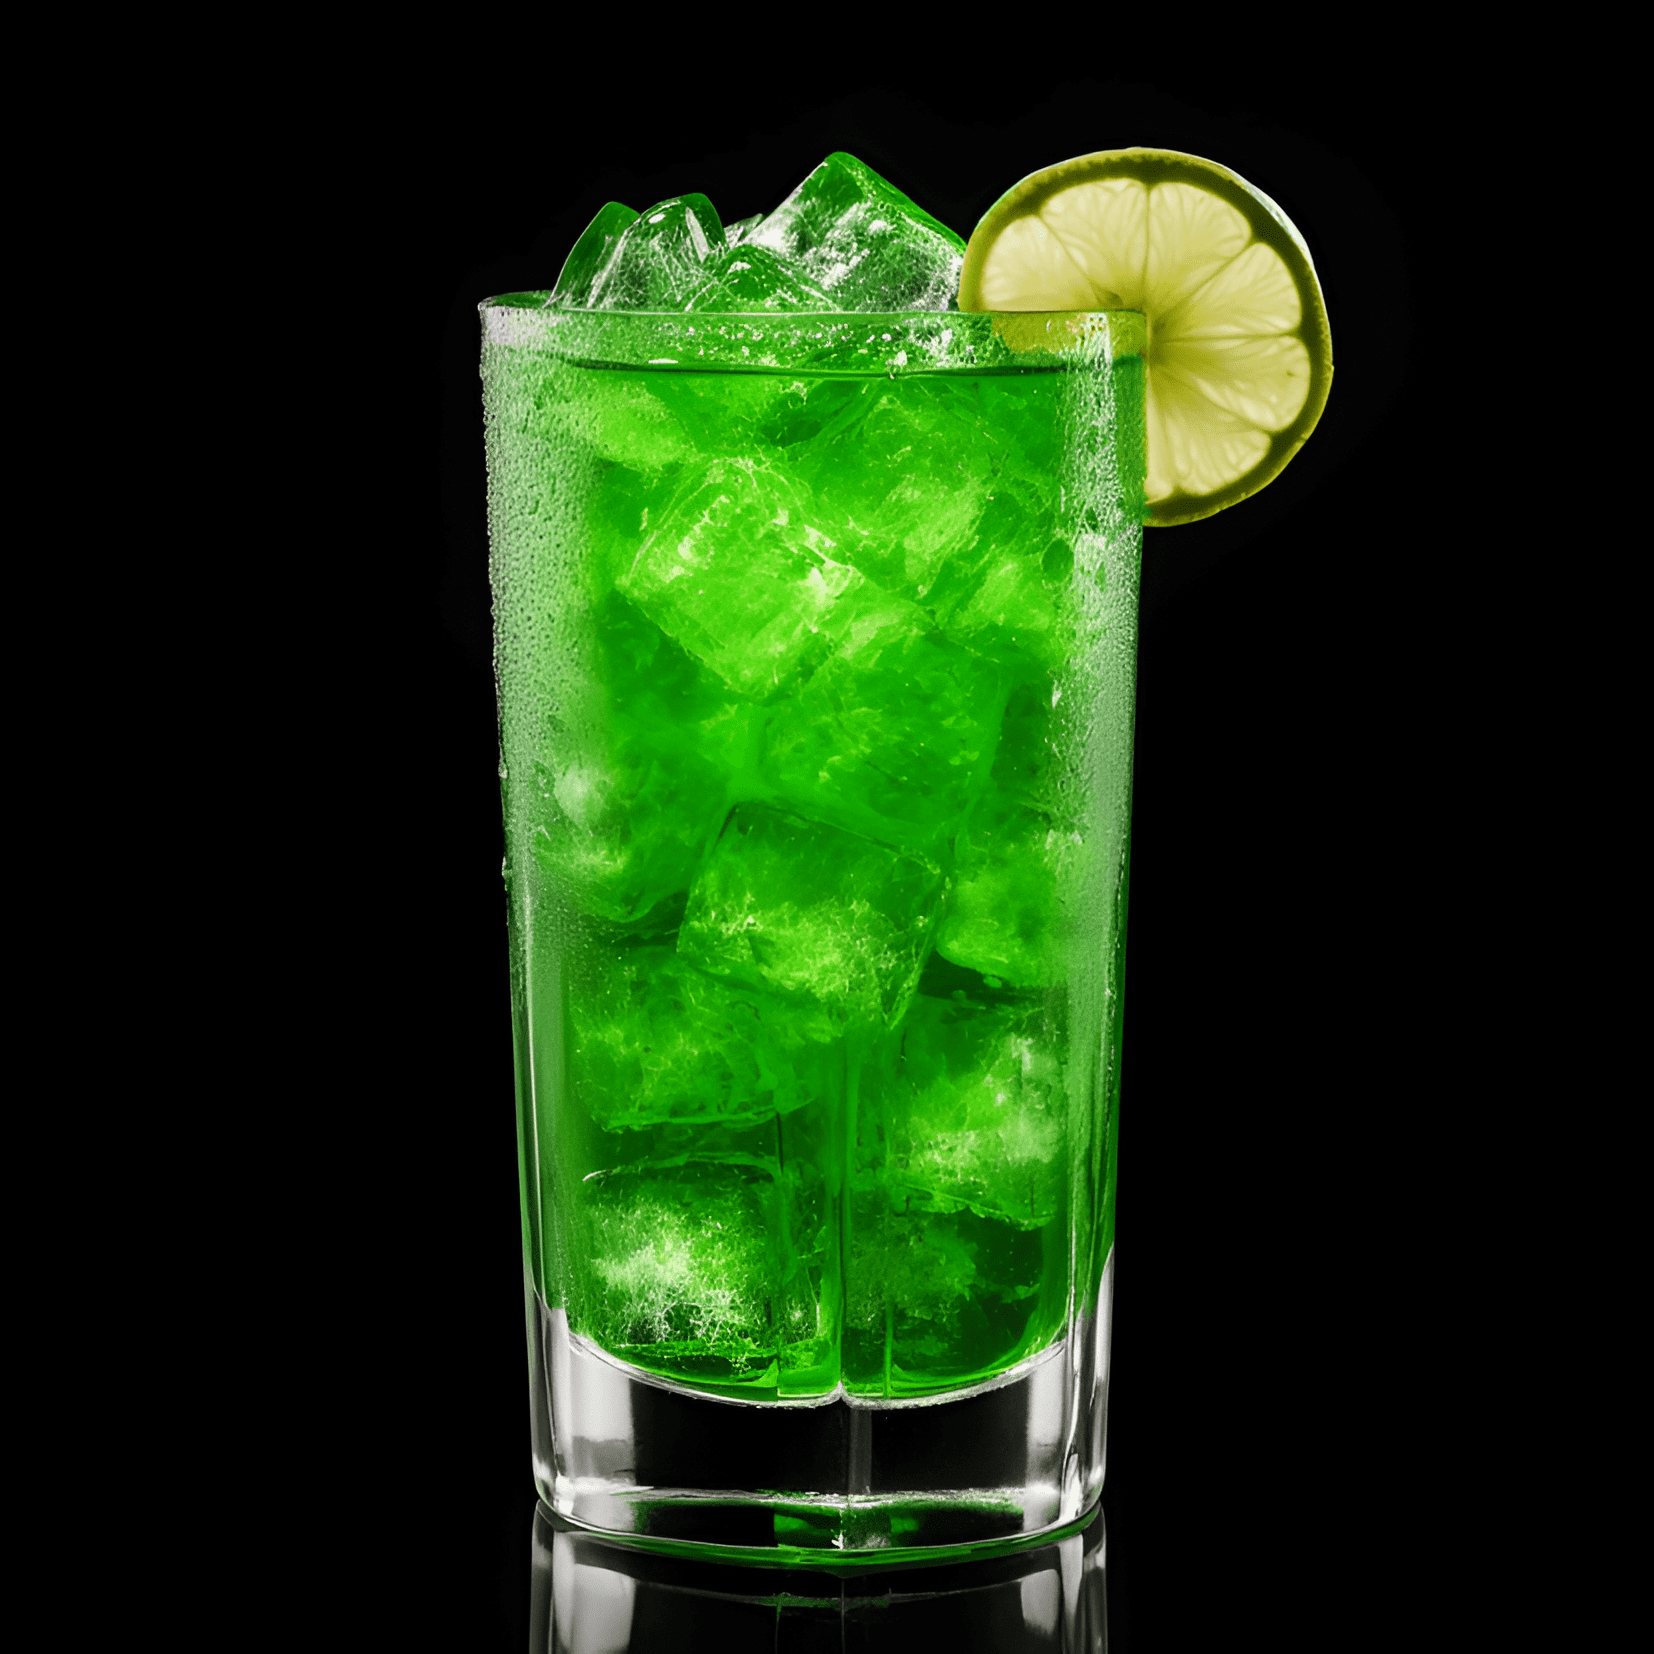 Green Demon Cocktail Recipe - The Green Demon is a sweet and sour cocktail with a strong, fruity flavor. The combination of melon liqueur, lemon-lime soda, and citrus vodka creates a refreshing and tangy taste, while the addition of white rum adds a hint of warmth and depth.